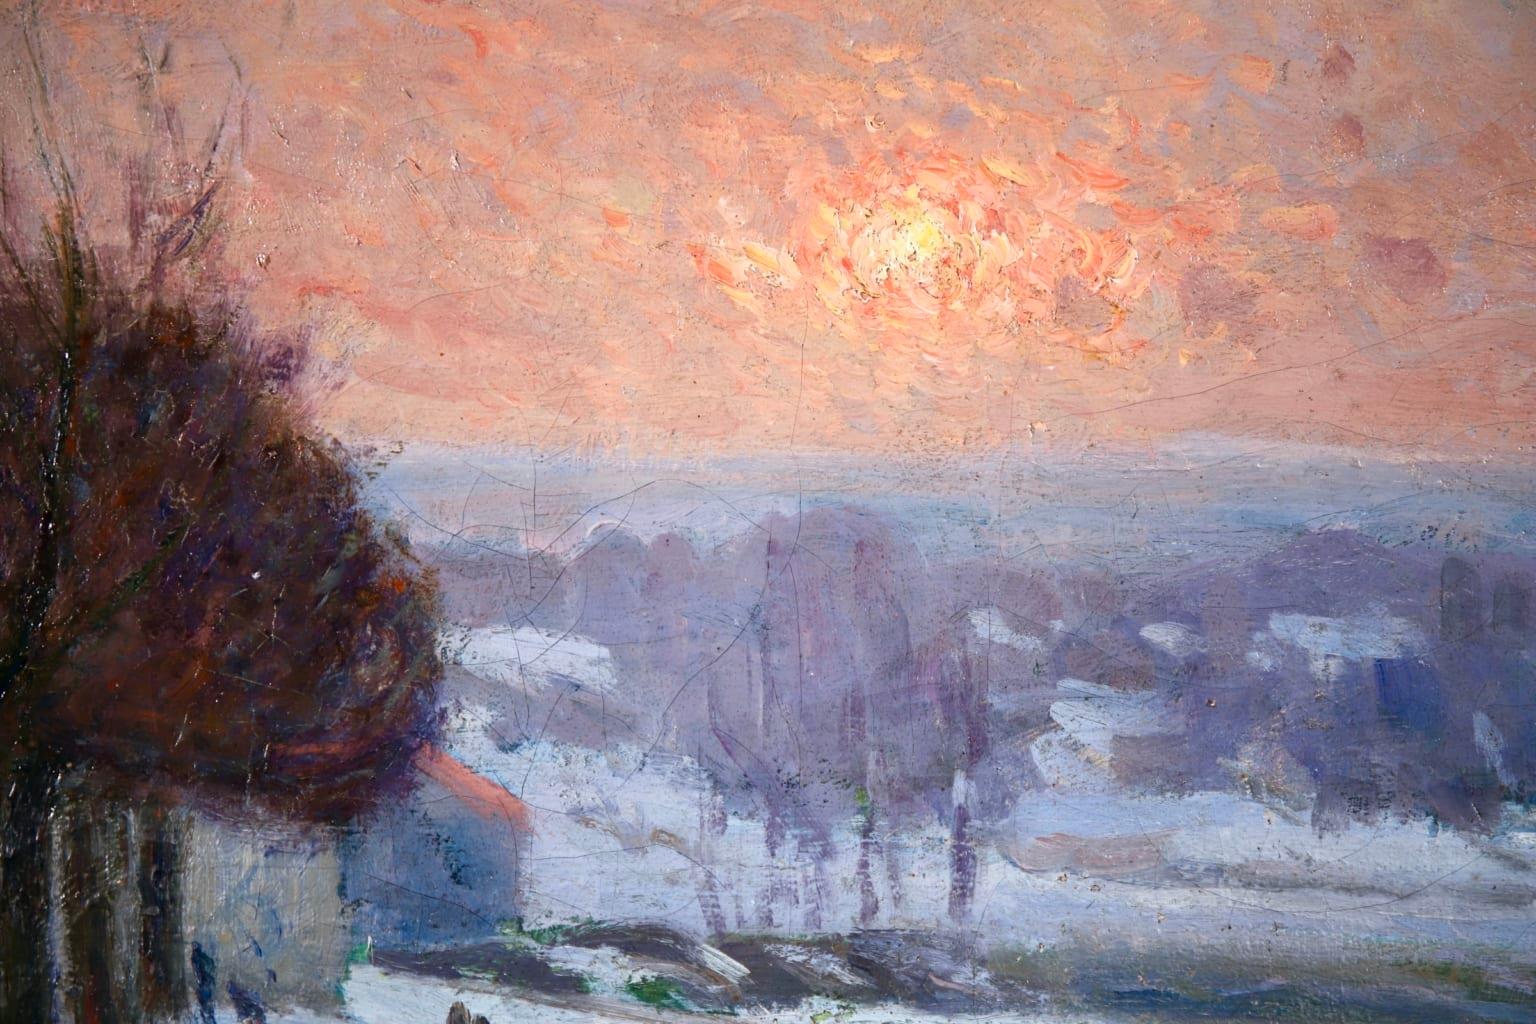 Snow on the Seine - Impressionist Winter River Landscape by Armand Guillaumin 3